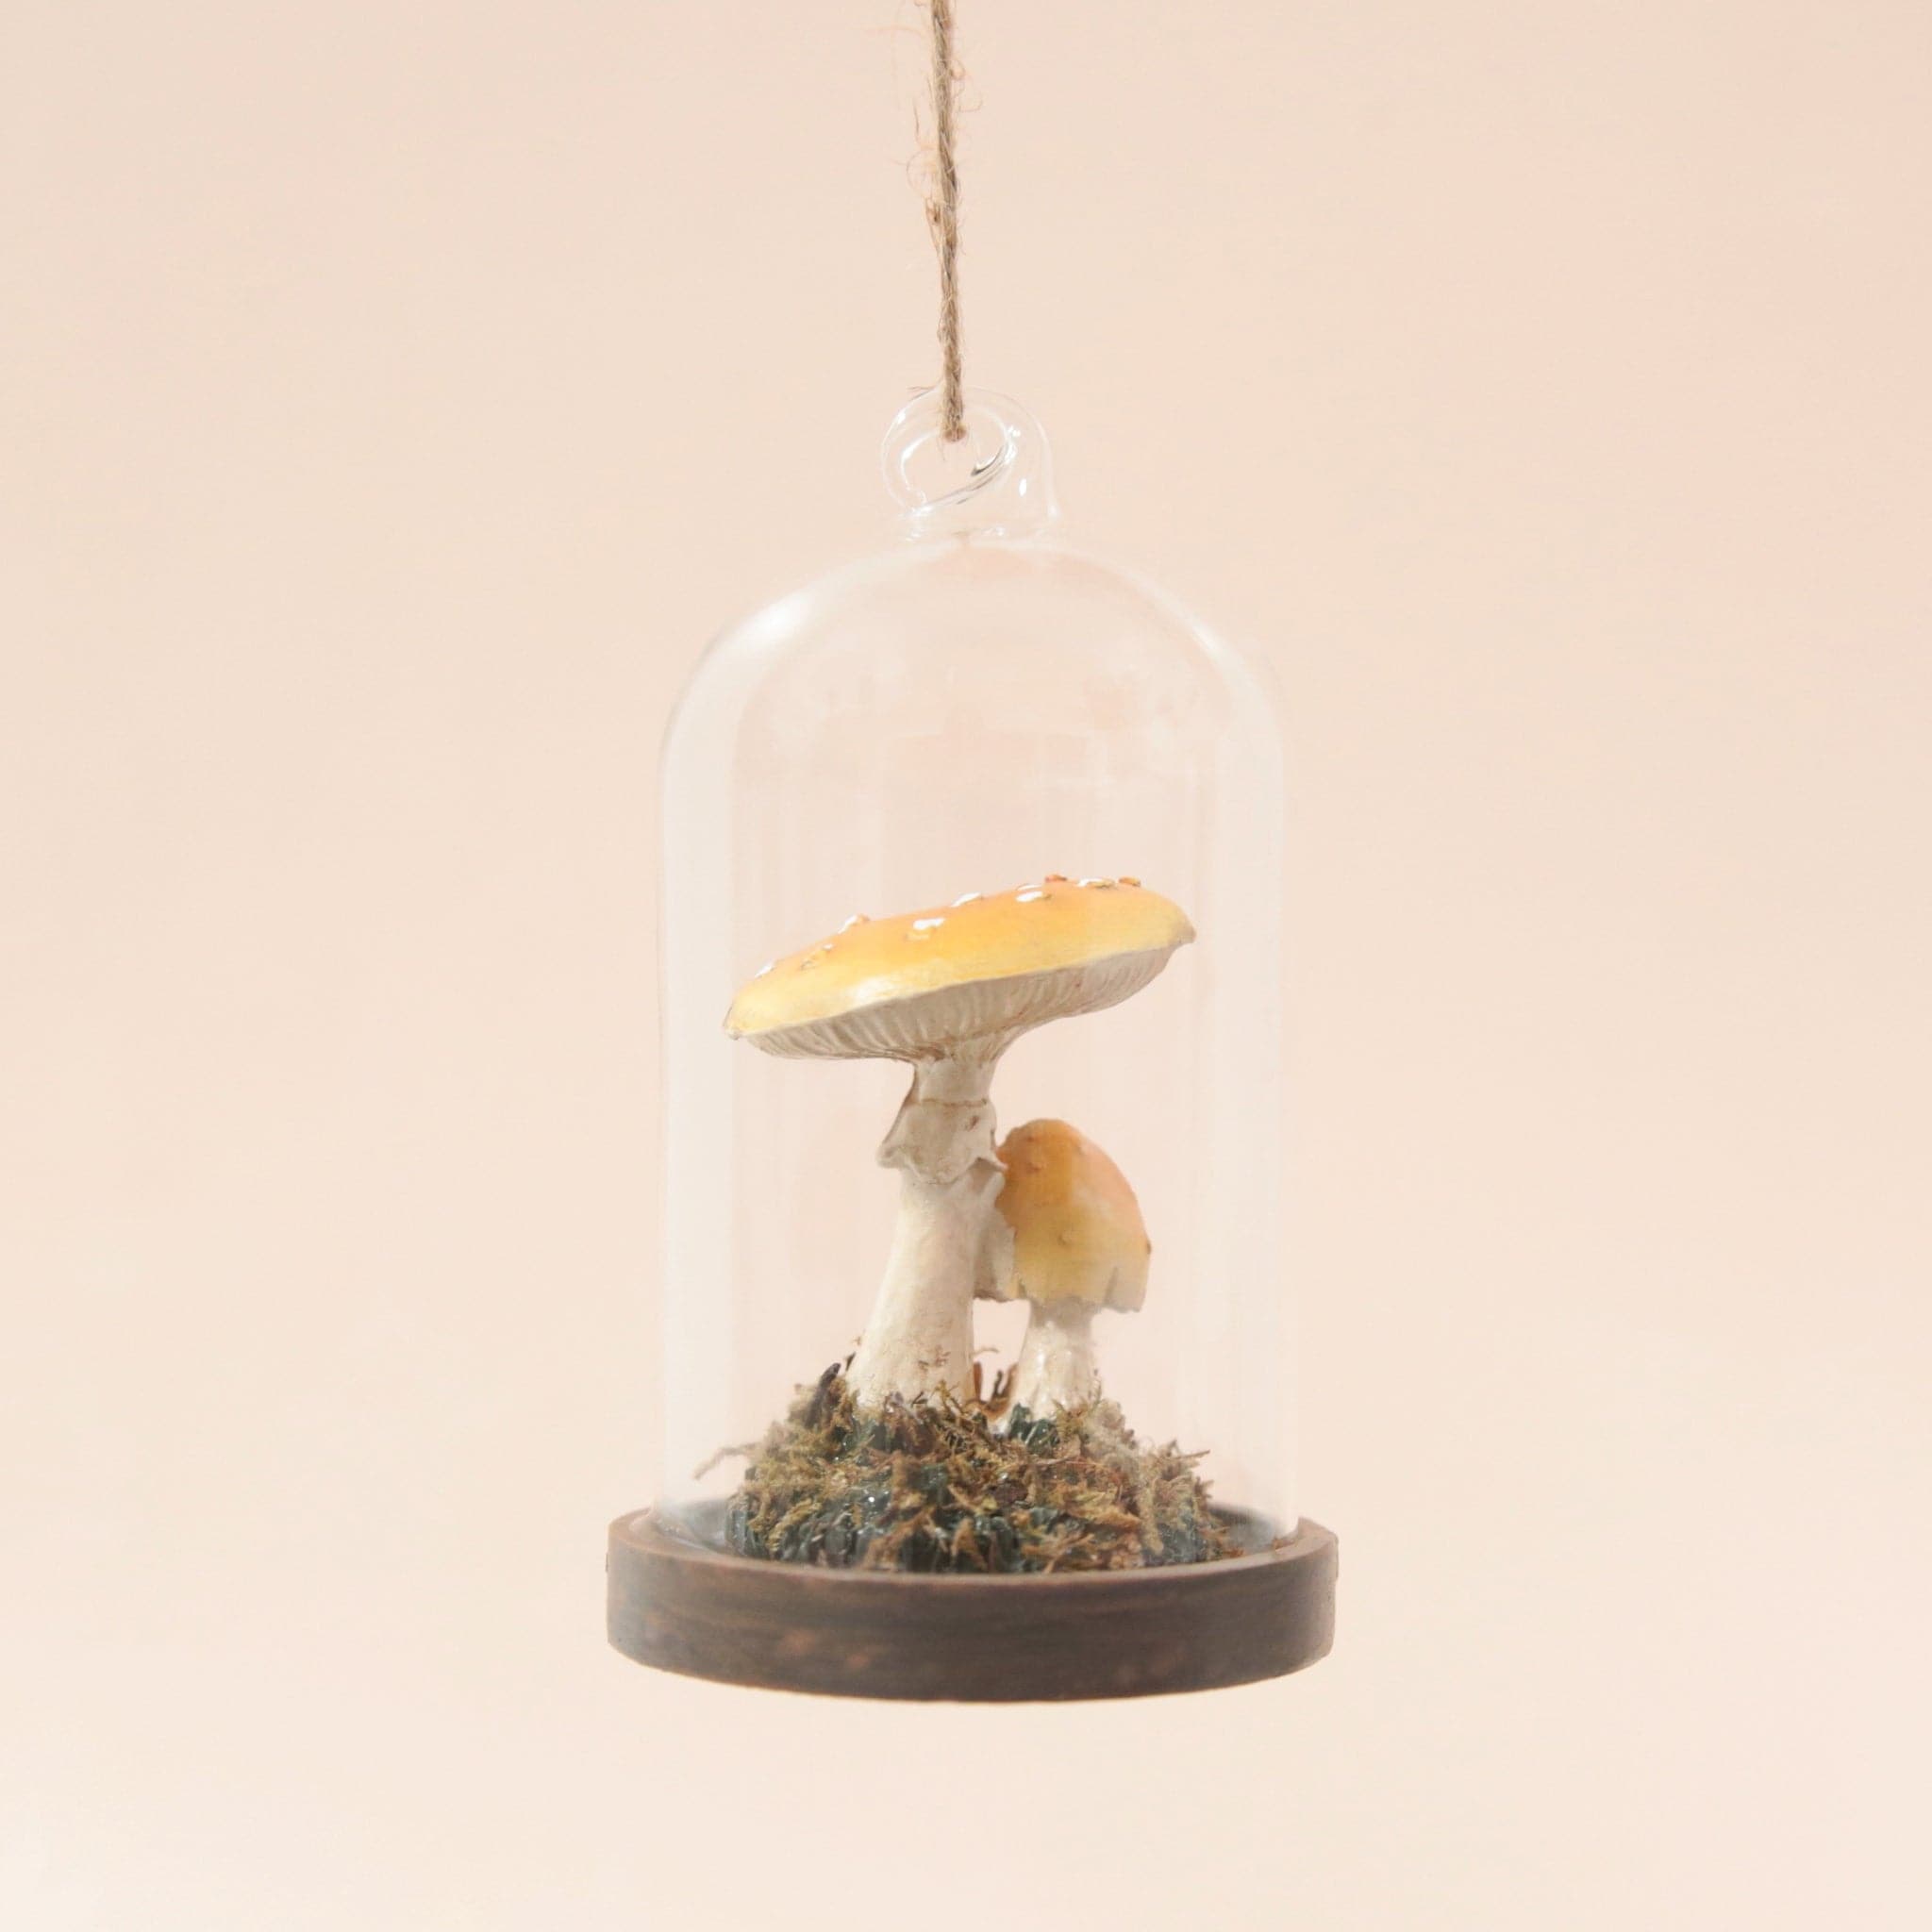 This mushroom ornament features two mushrooms of different sizes with a yellowy/tan top, placed in a glass dome cloche with a wooden base and moss covering the bottom.